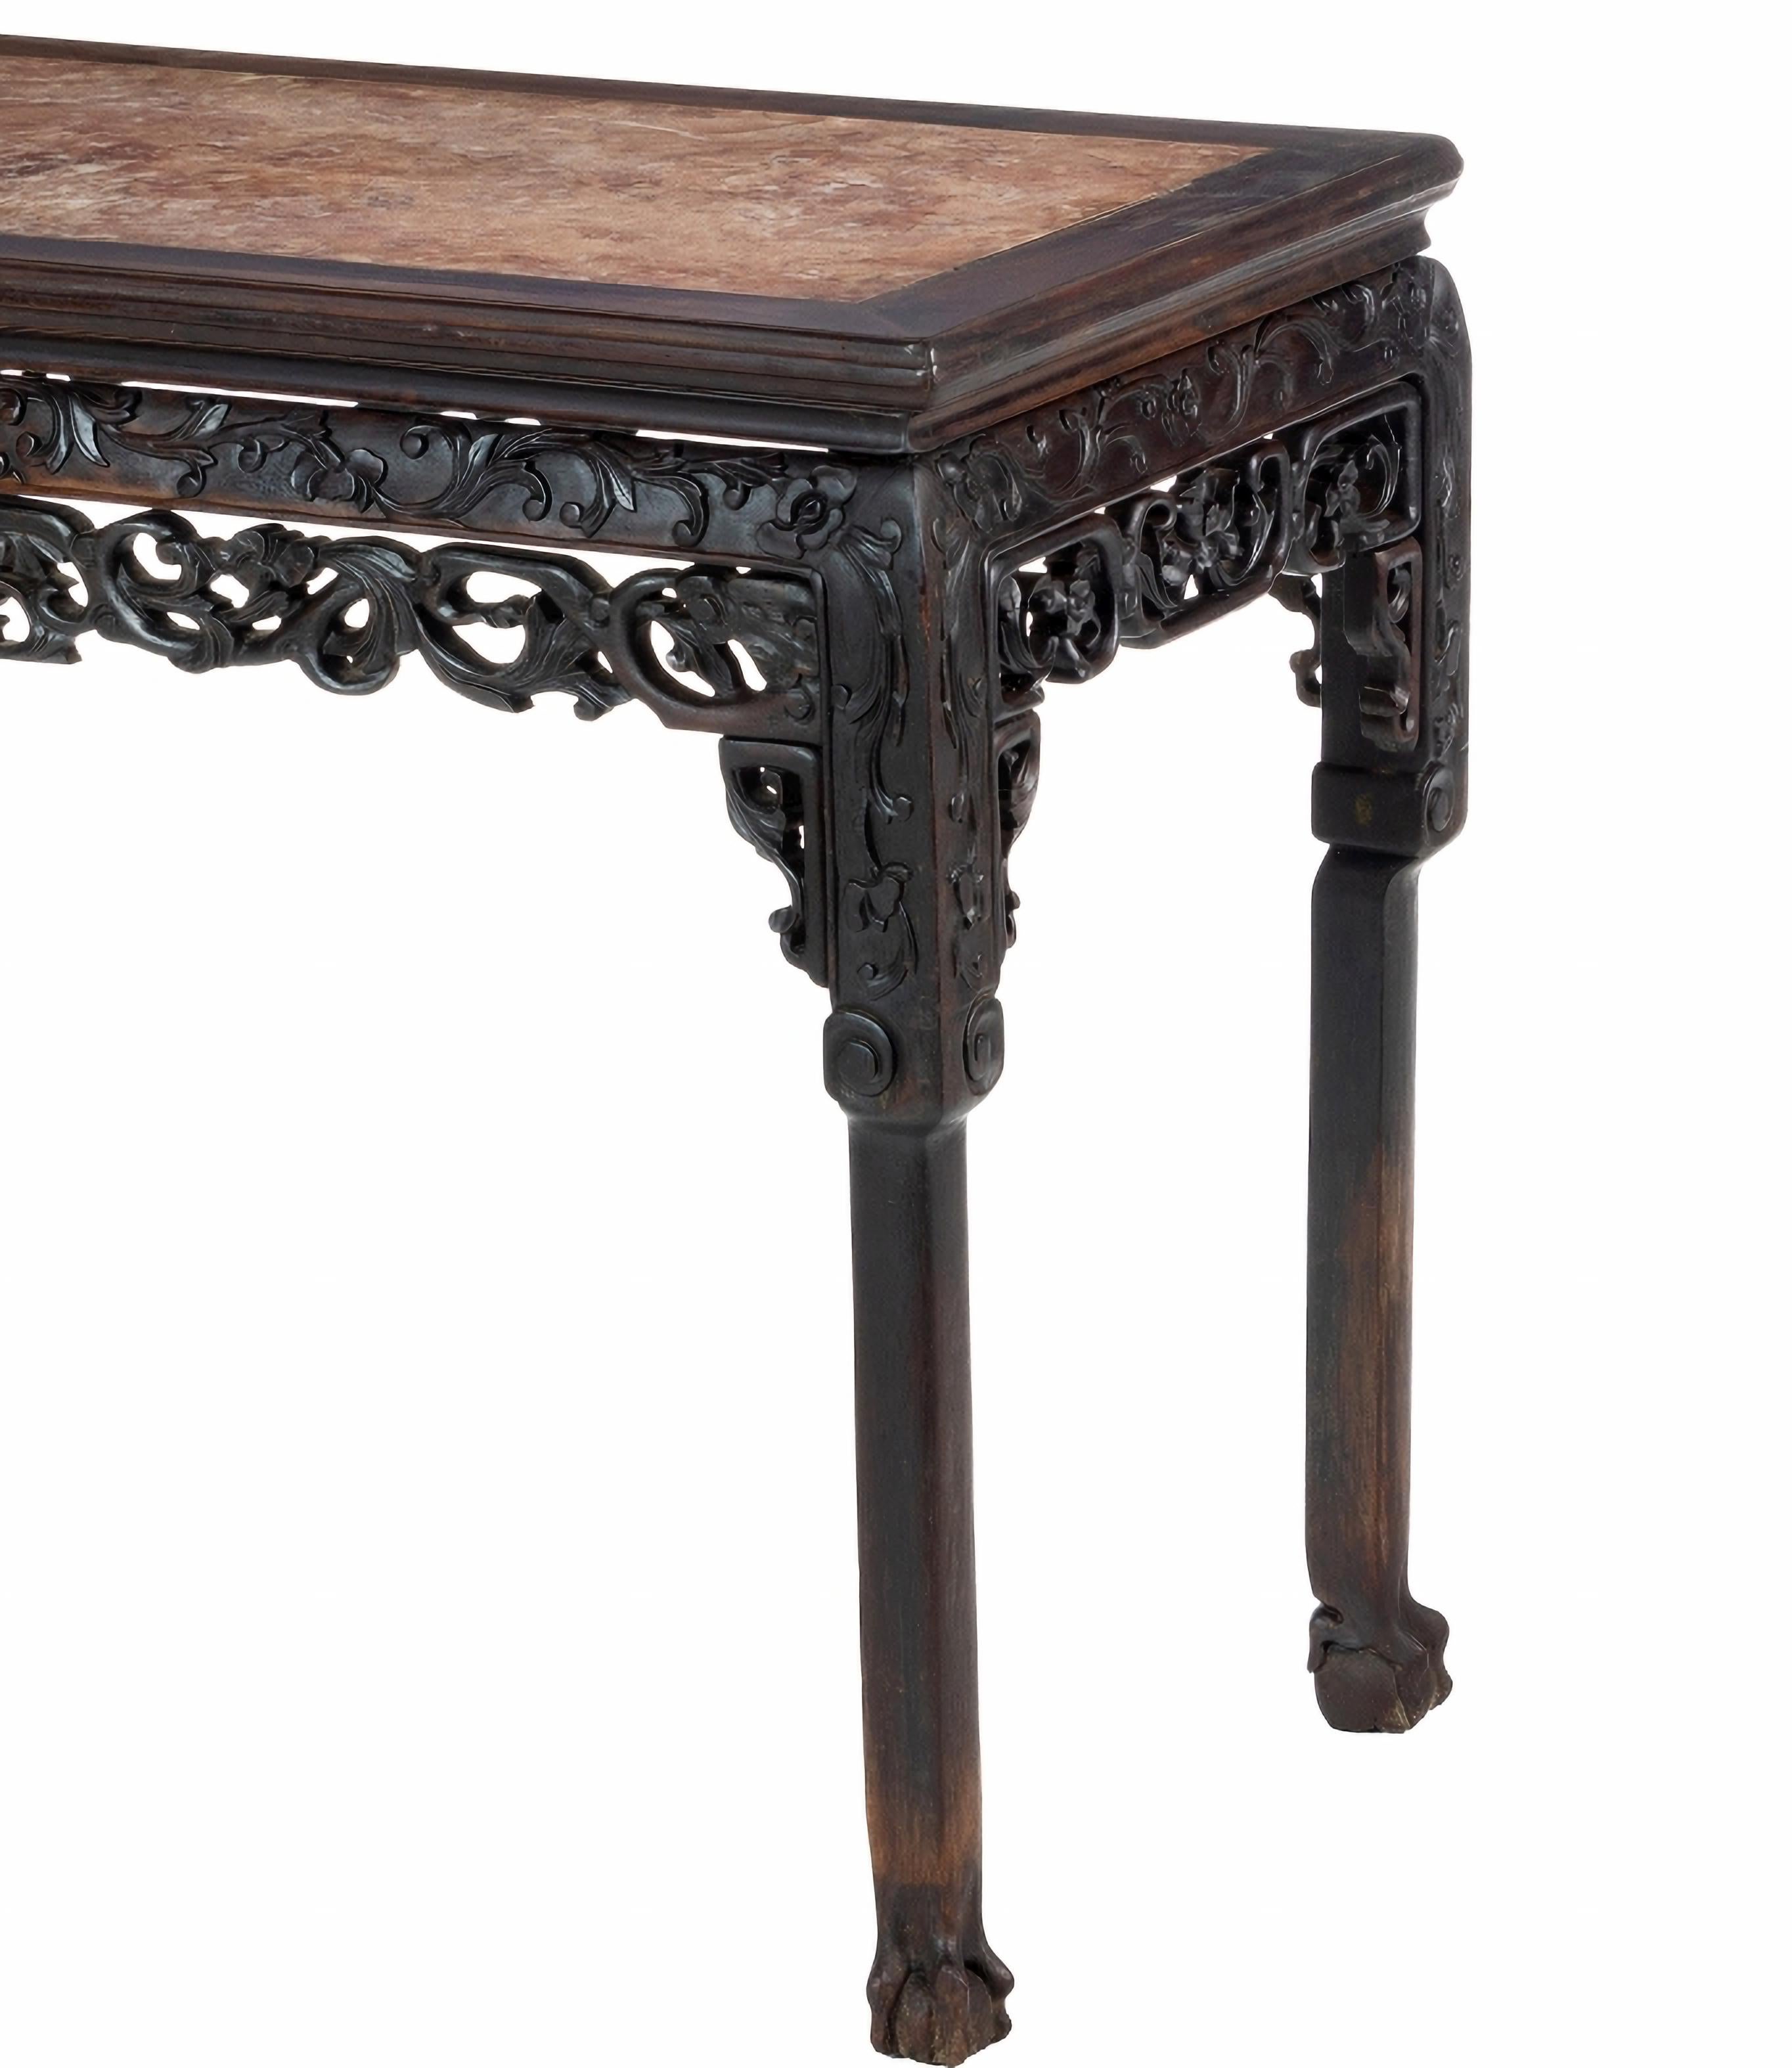 IMPORTANT COFFEE TABLE

Chinese 19th Century
in hardwood, with carvings.
Pink marble top.
Dim.: 76 x 100 x 55 cm
good conditions